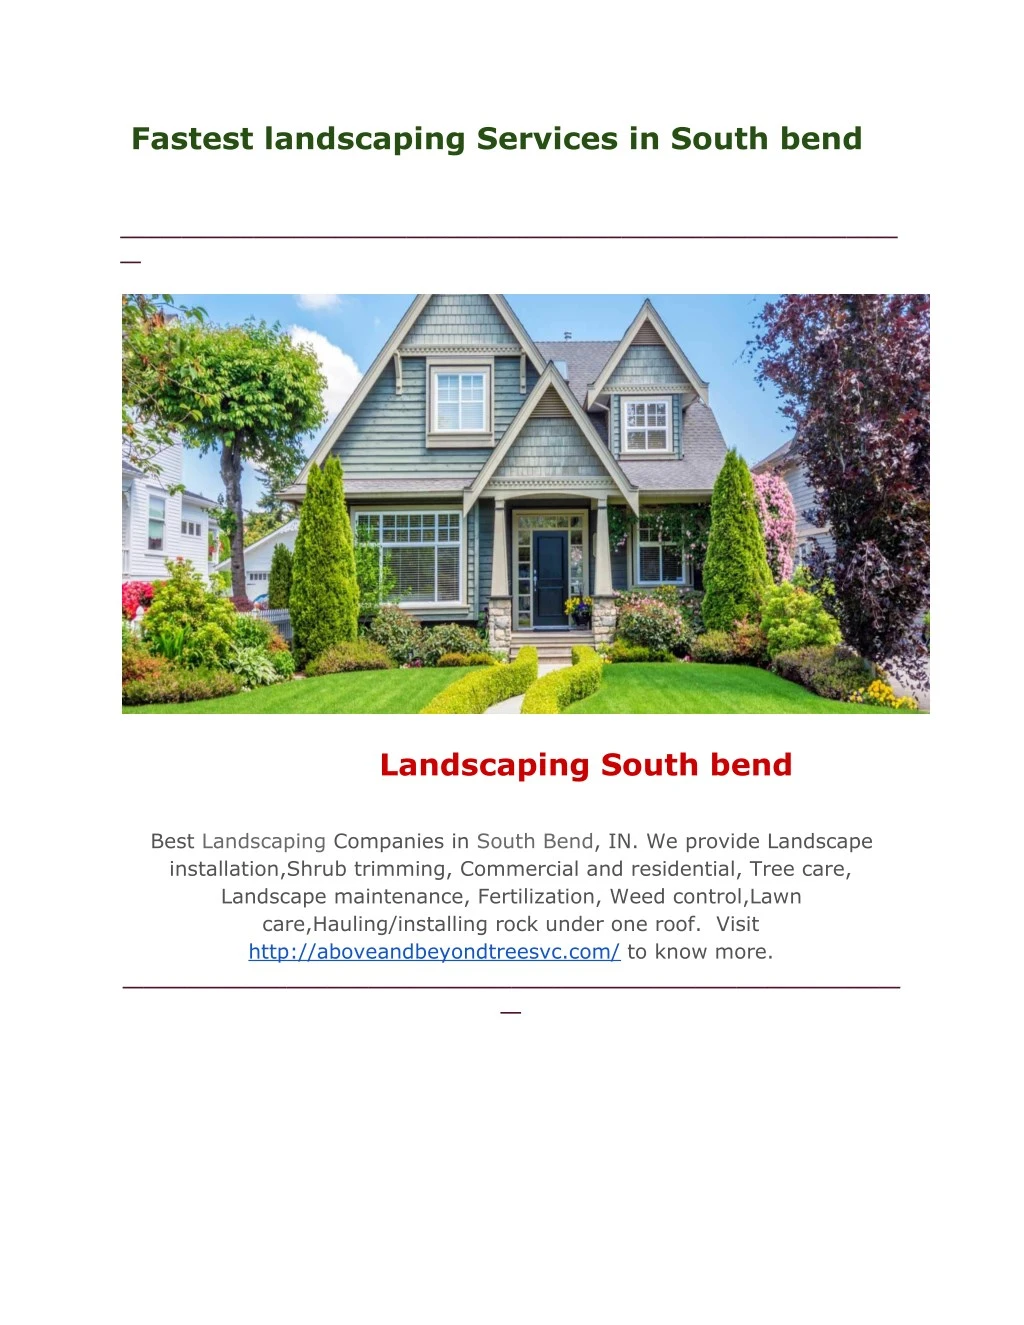 fastest landscaping services in south bend